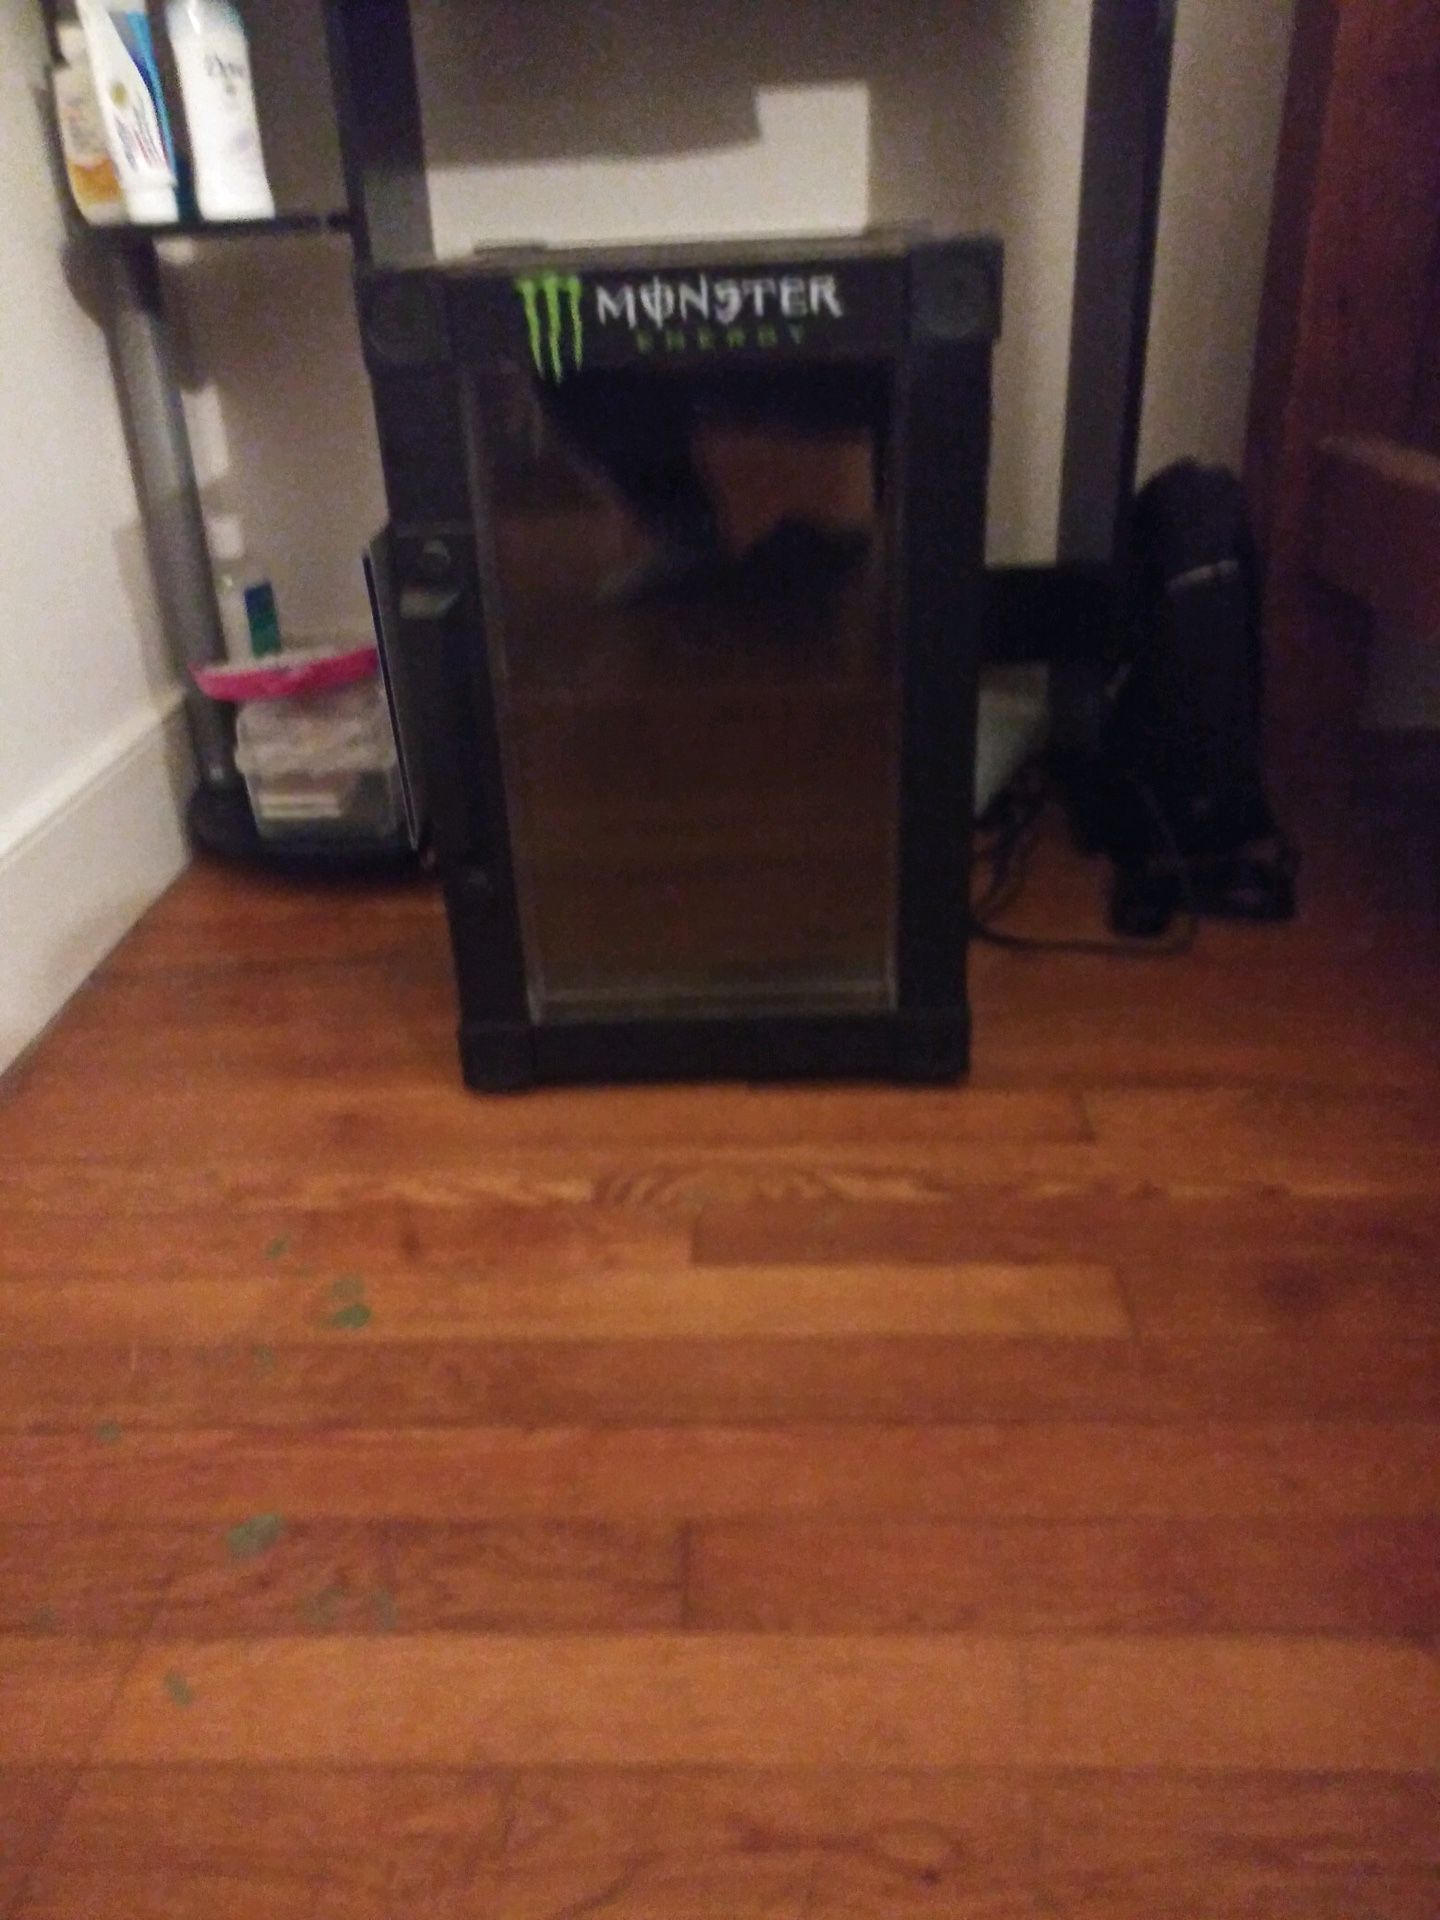 Monster fridge works great nothing wrong at all